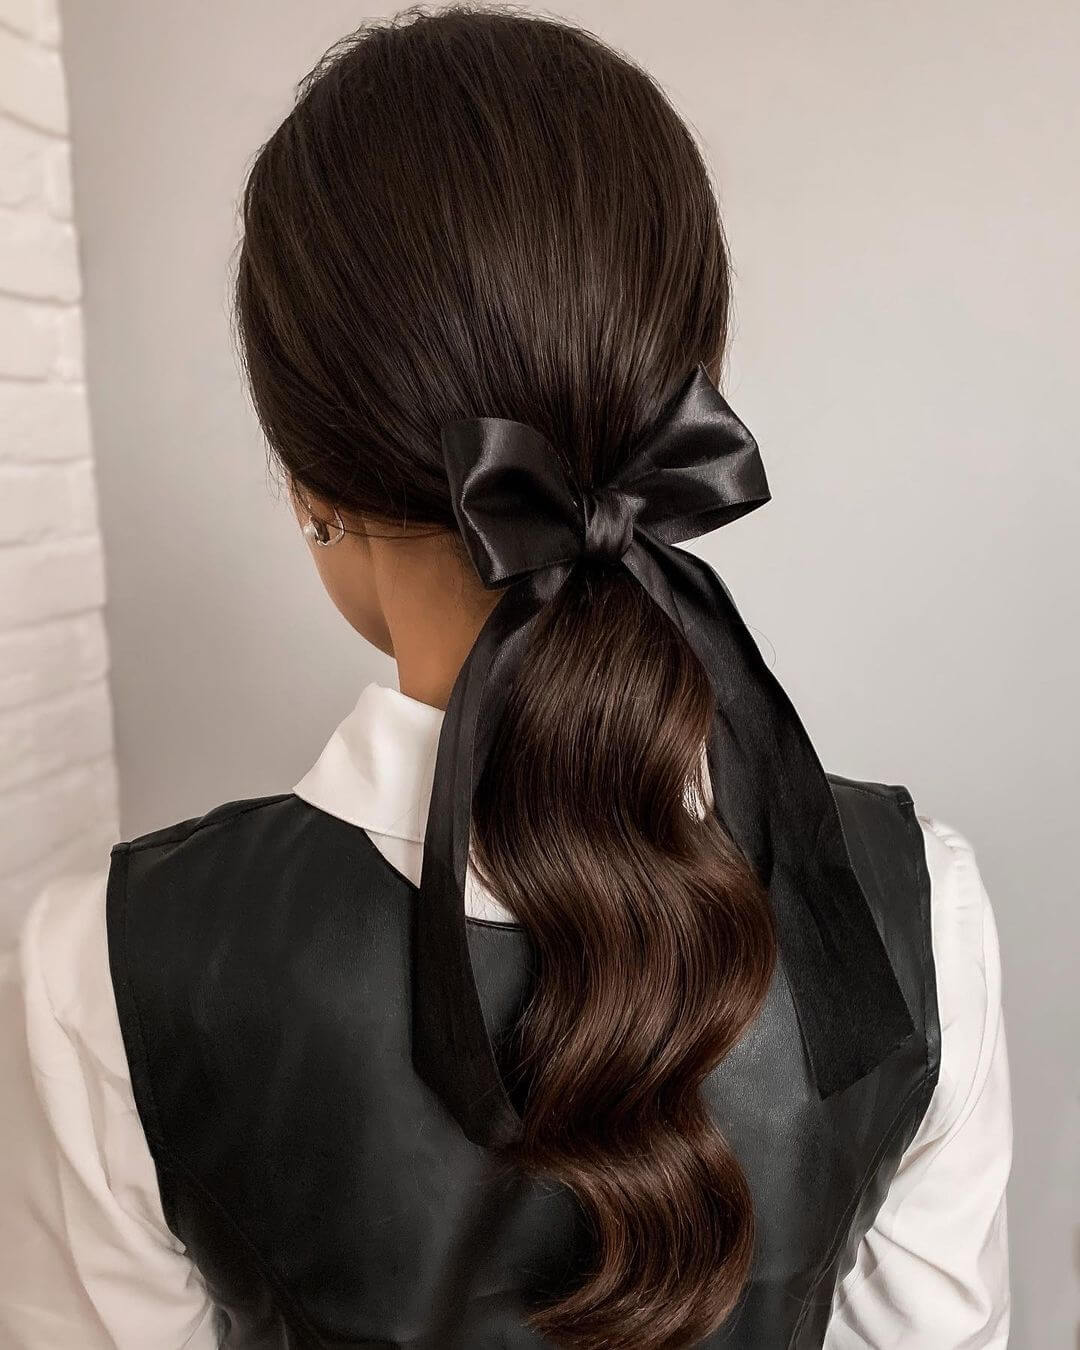 6 Easy Office Hairstyles For Long Hair